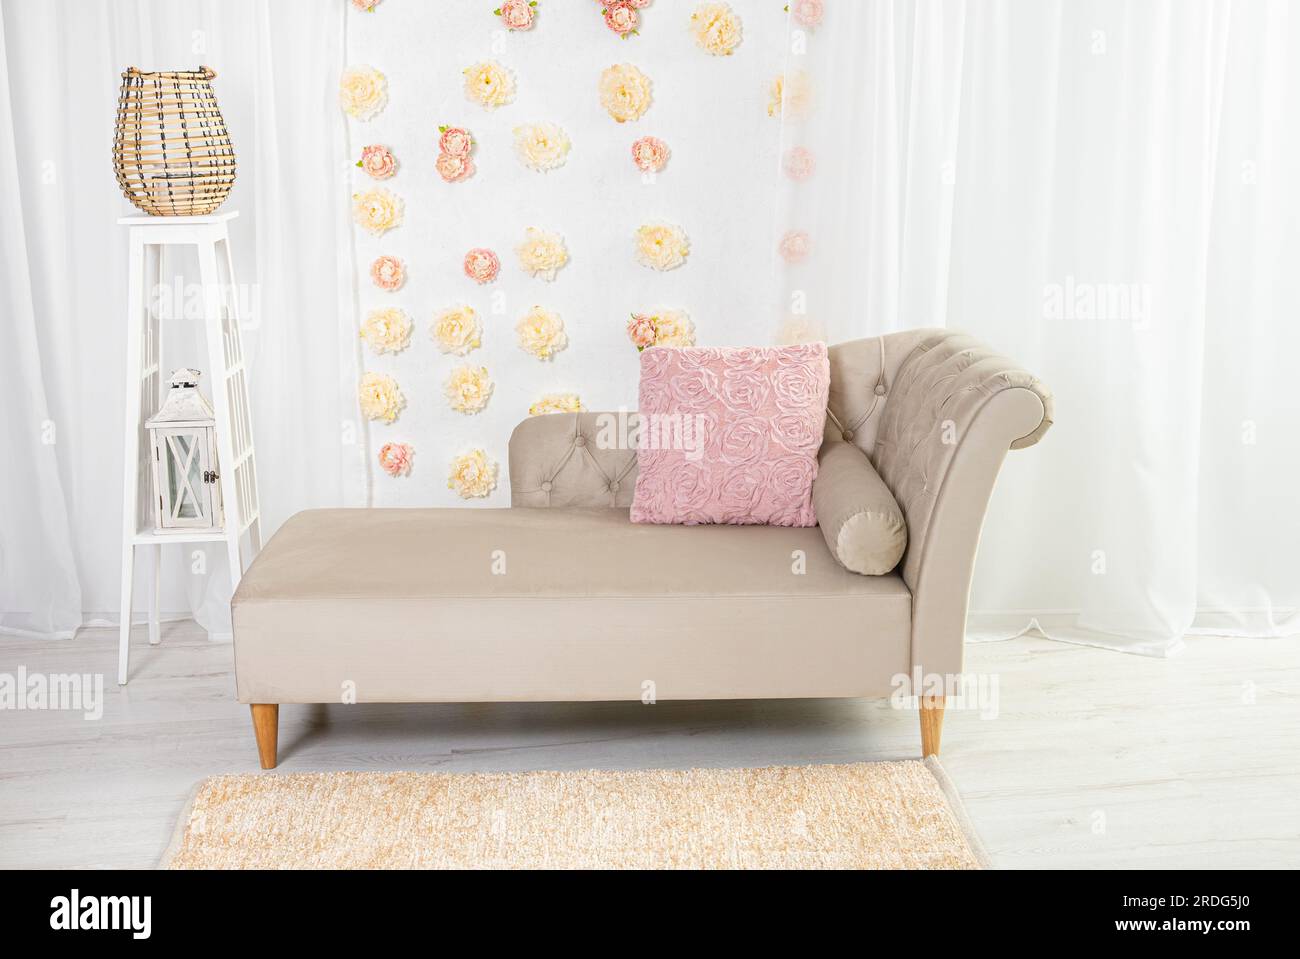 Beige vintage but modern canape style sofa with pink pillow and 3D peony flowers for wall decoration in white interior. Stock Photo